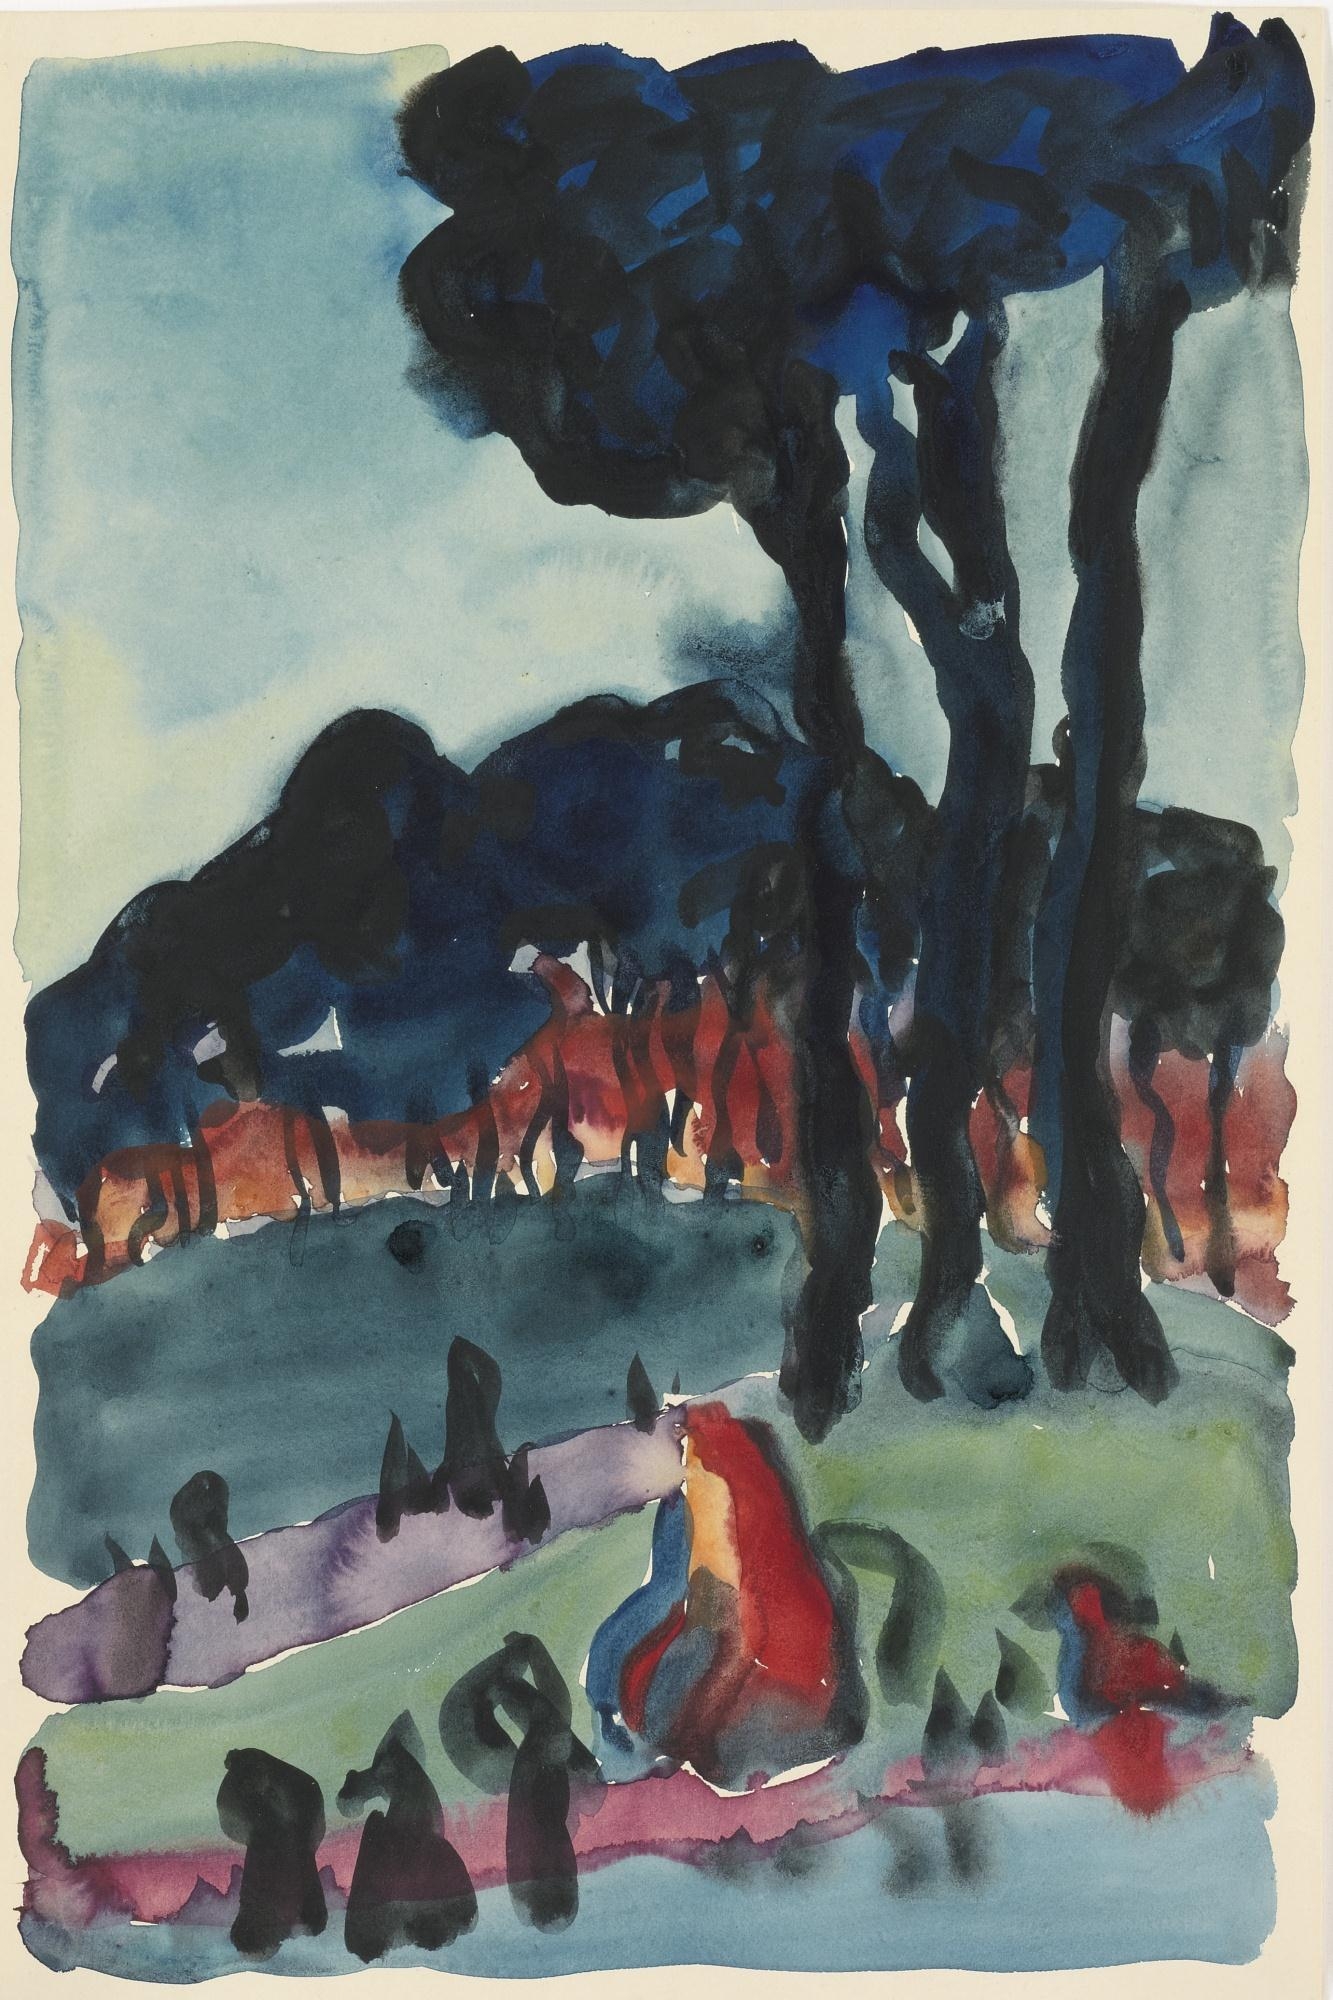 Artwork by Georgia O'Keeffe, THE PARK AT NIGHT, Made of watercolor on paper